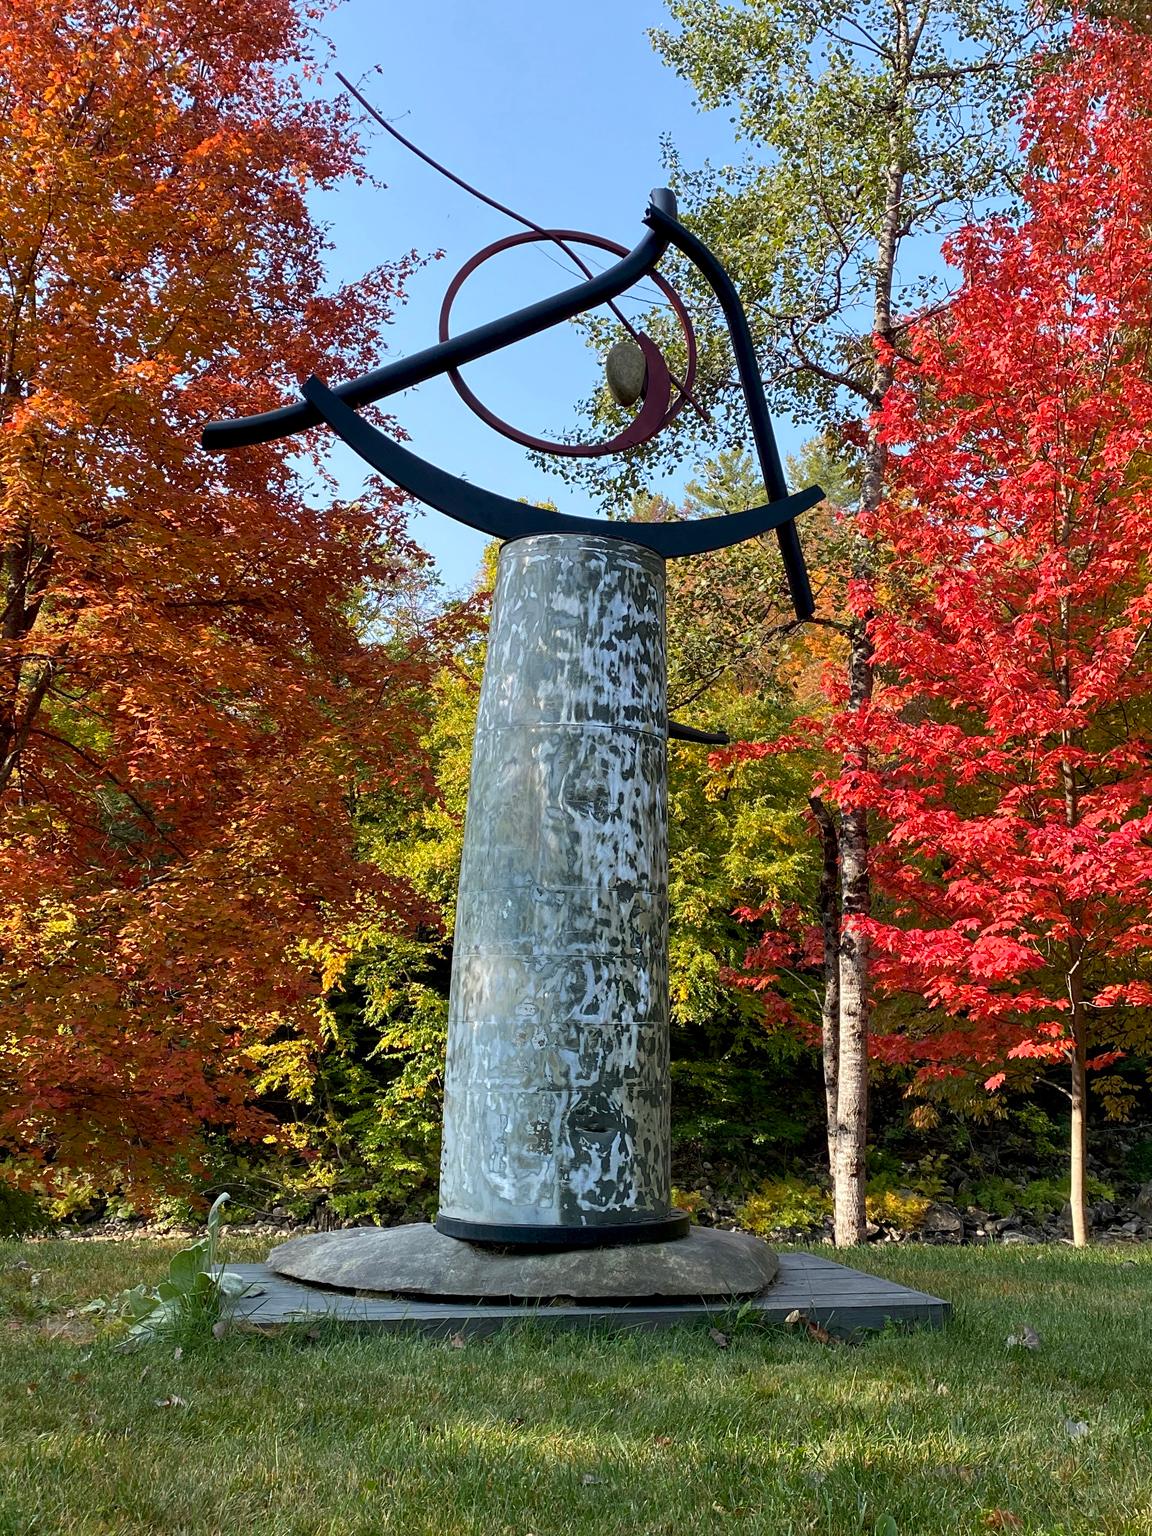 "Sisyphean Circle (tank top)" by John Van Alstine
Riverstone, stainless, galvanized, and powder-coated steel

The sculpture of John Van Alstine beautifully, and powerfully, balances the union of stone and metal, while exploring the relationship of